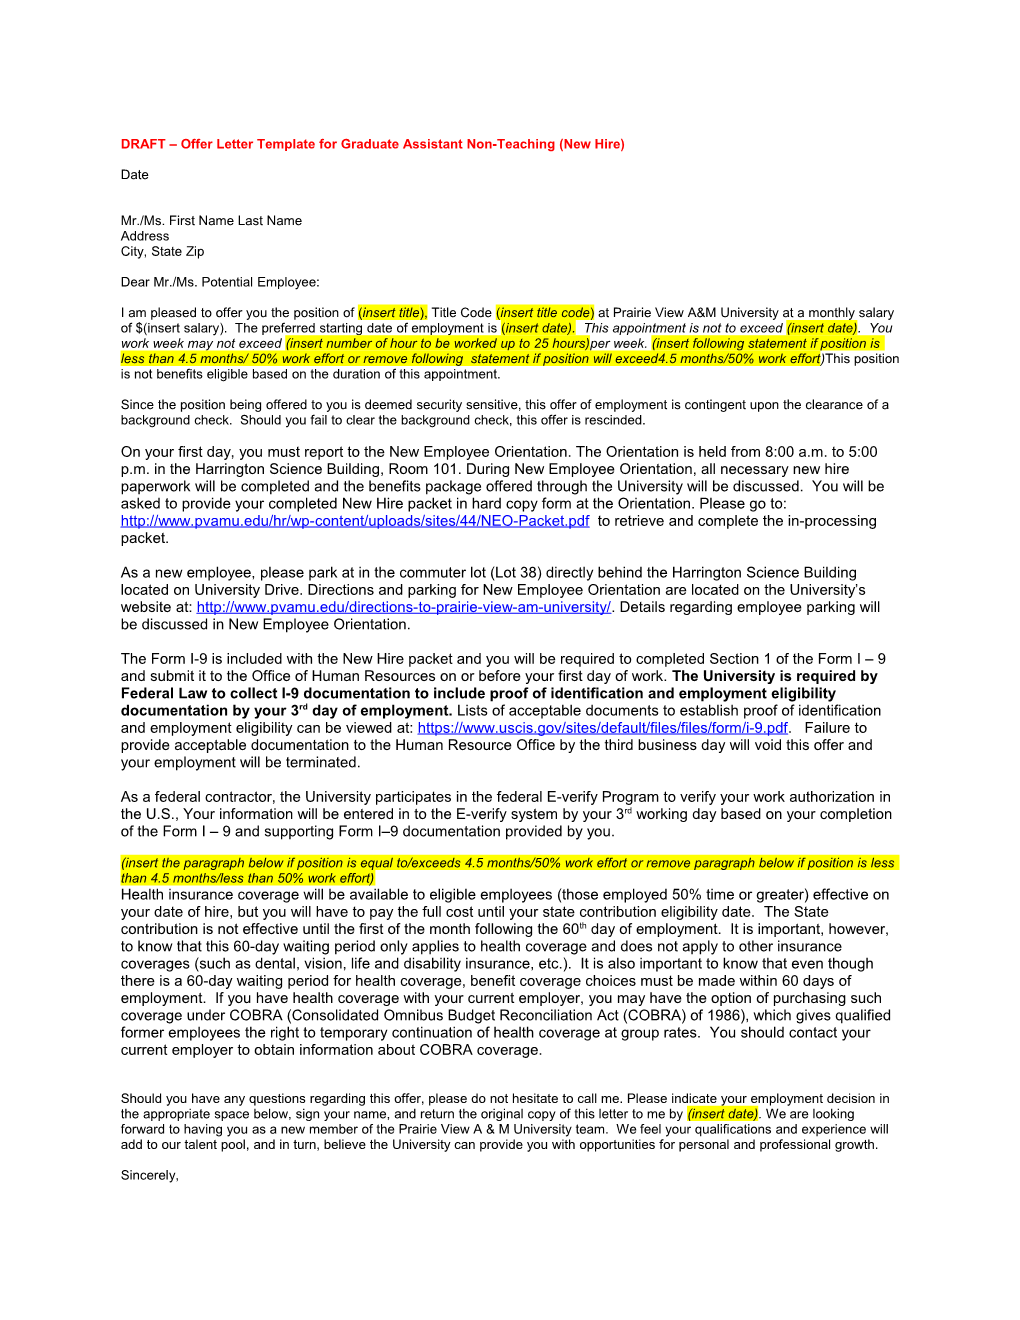 DRAFT Offer Letter Template for Graduate Assistant Non-Teaching (New Hire)